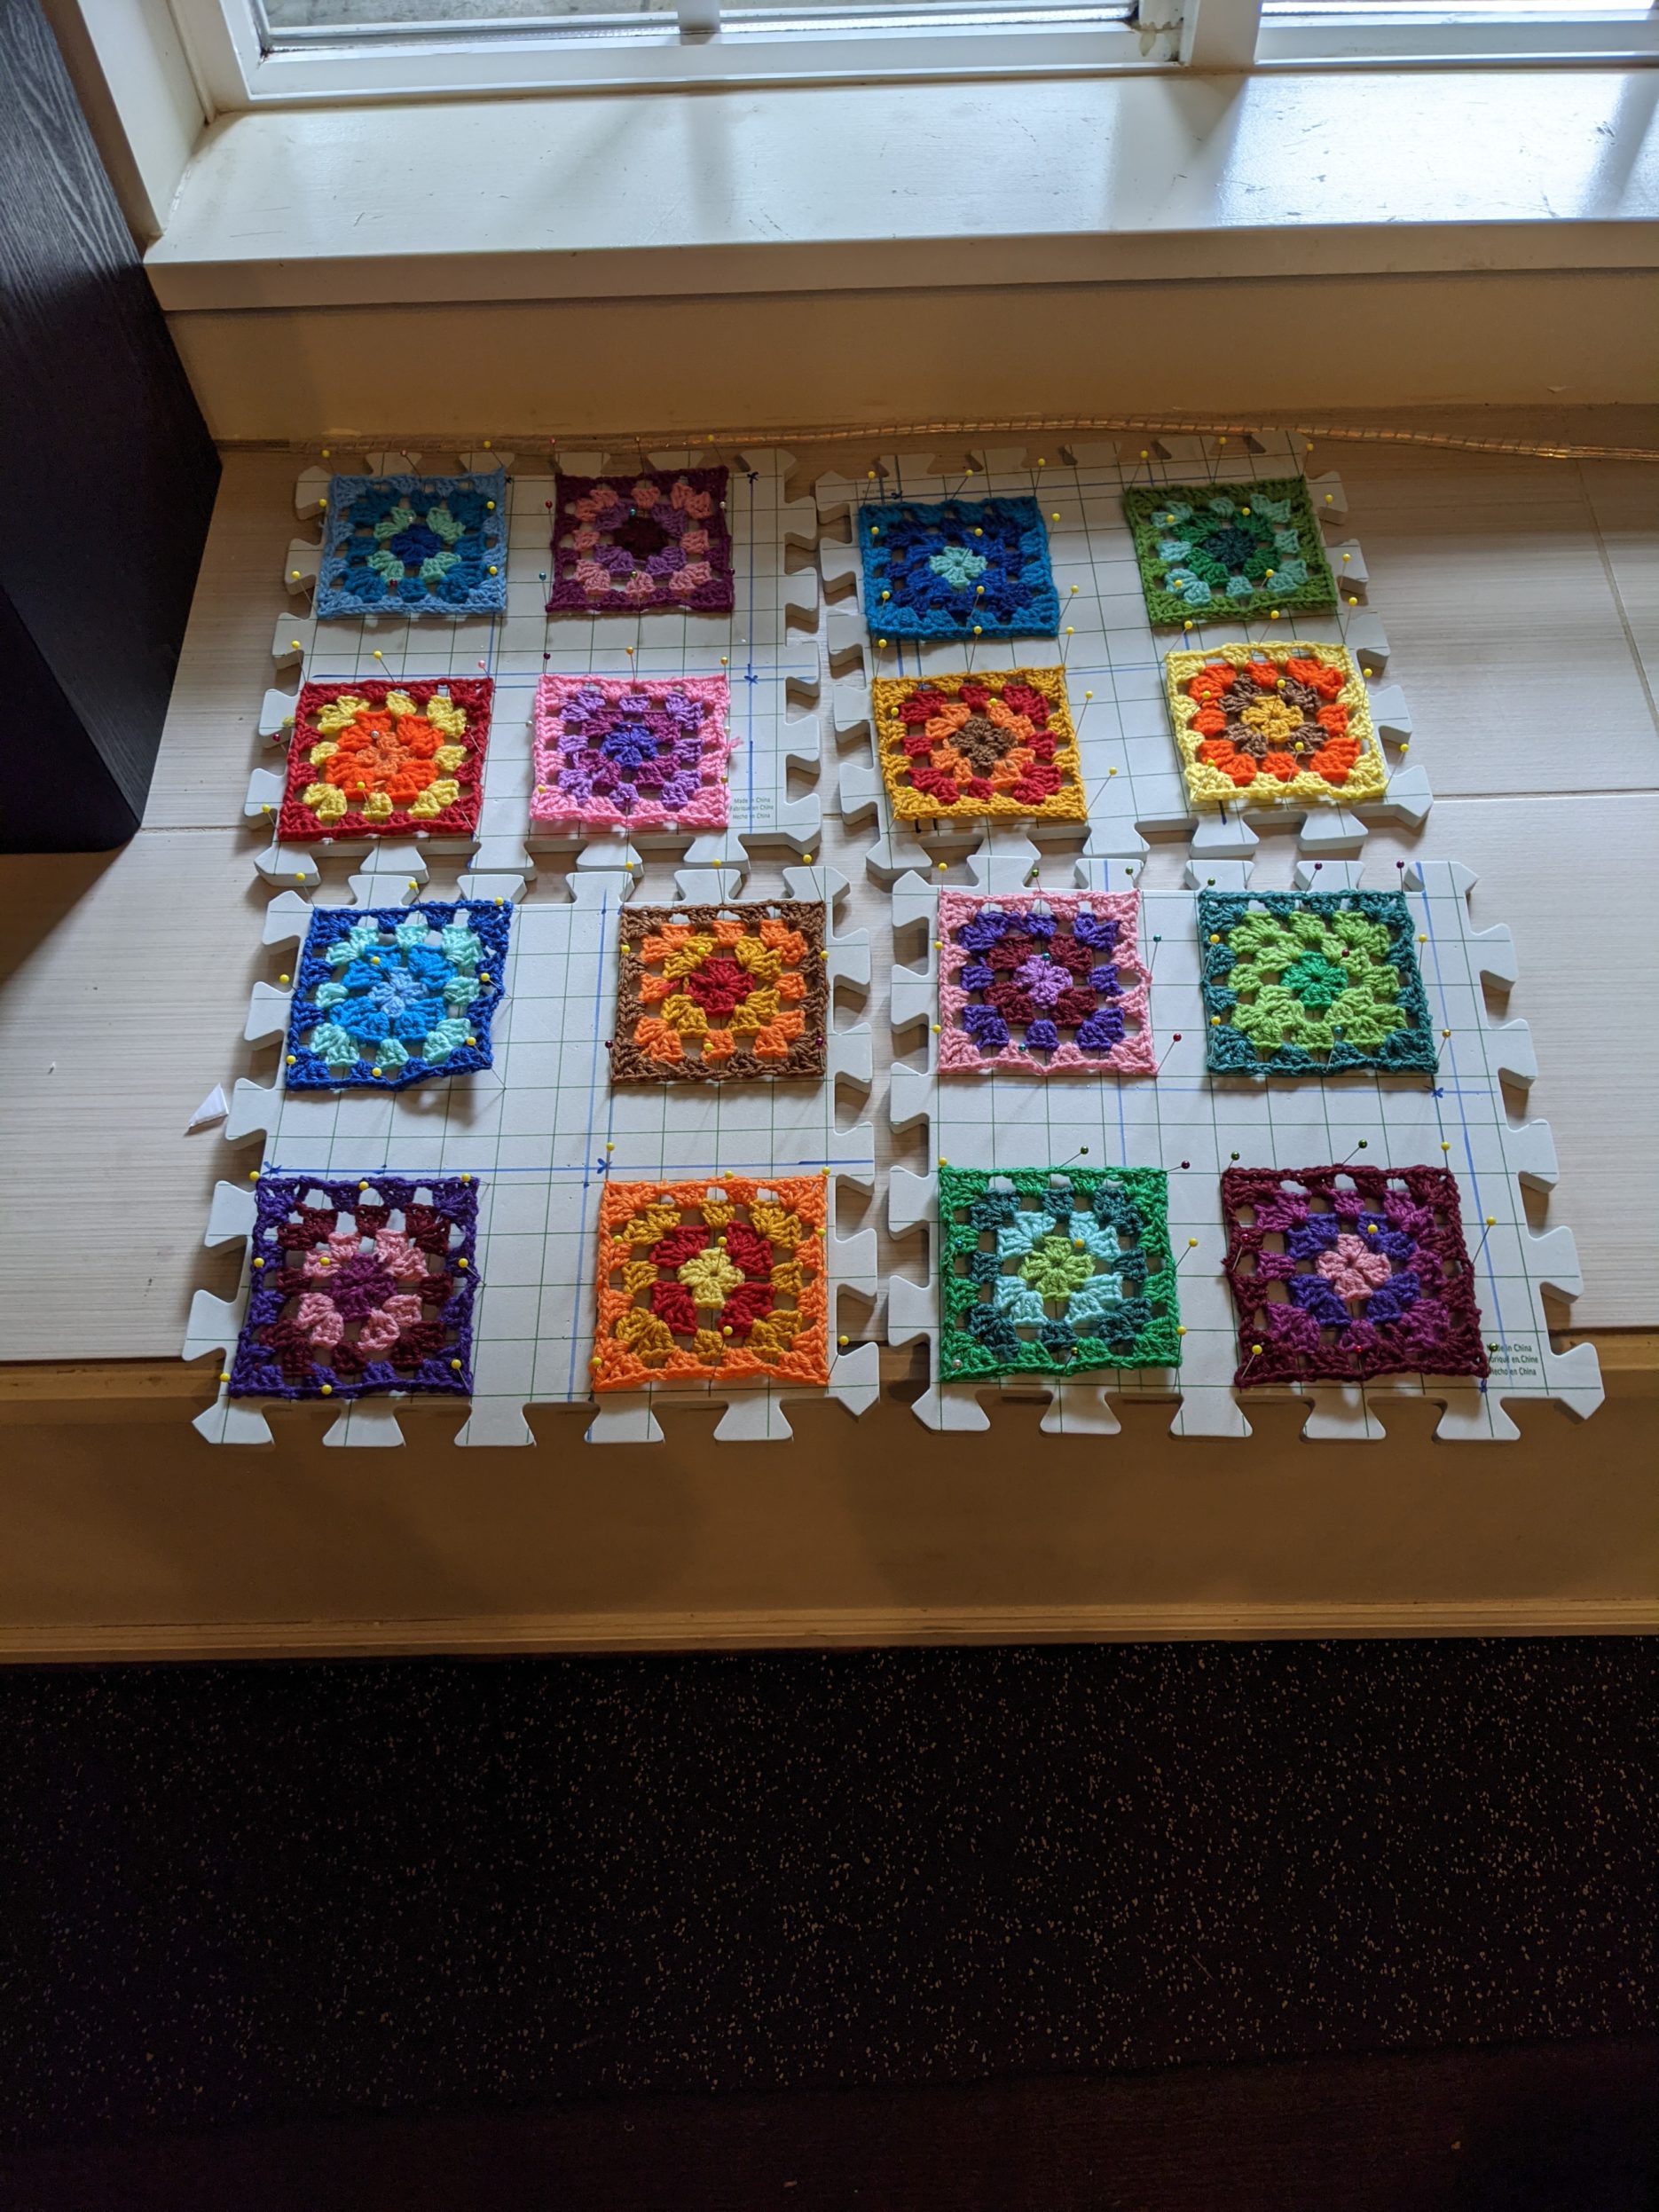 Granny squares being blocked out